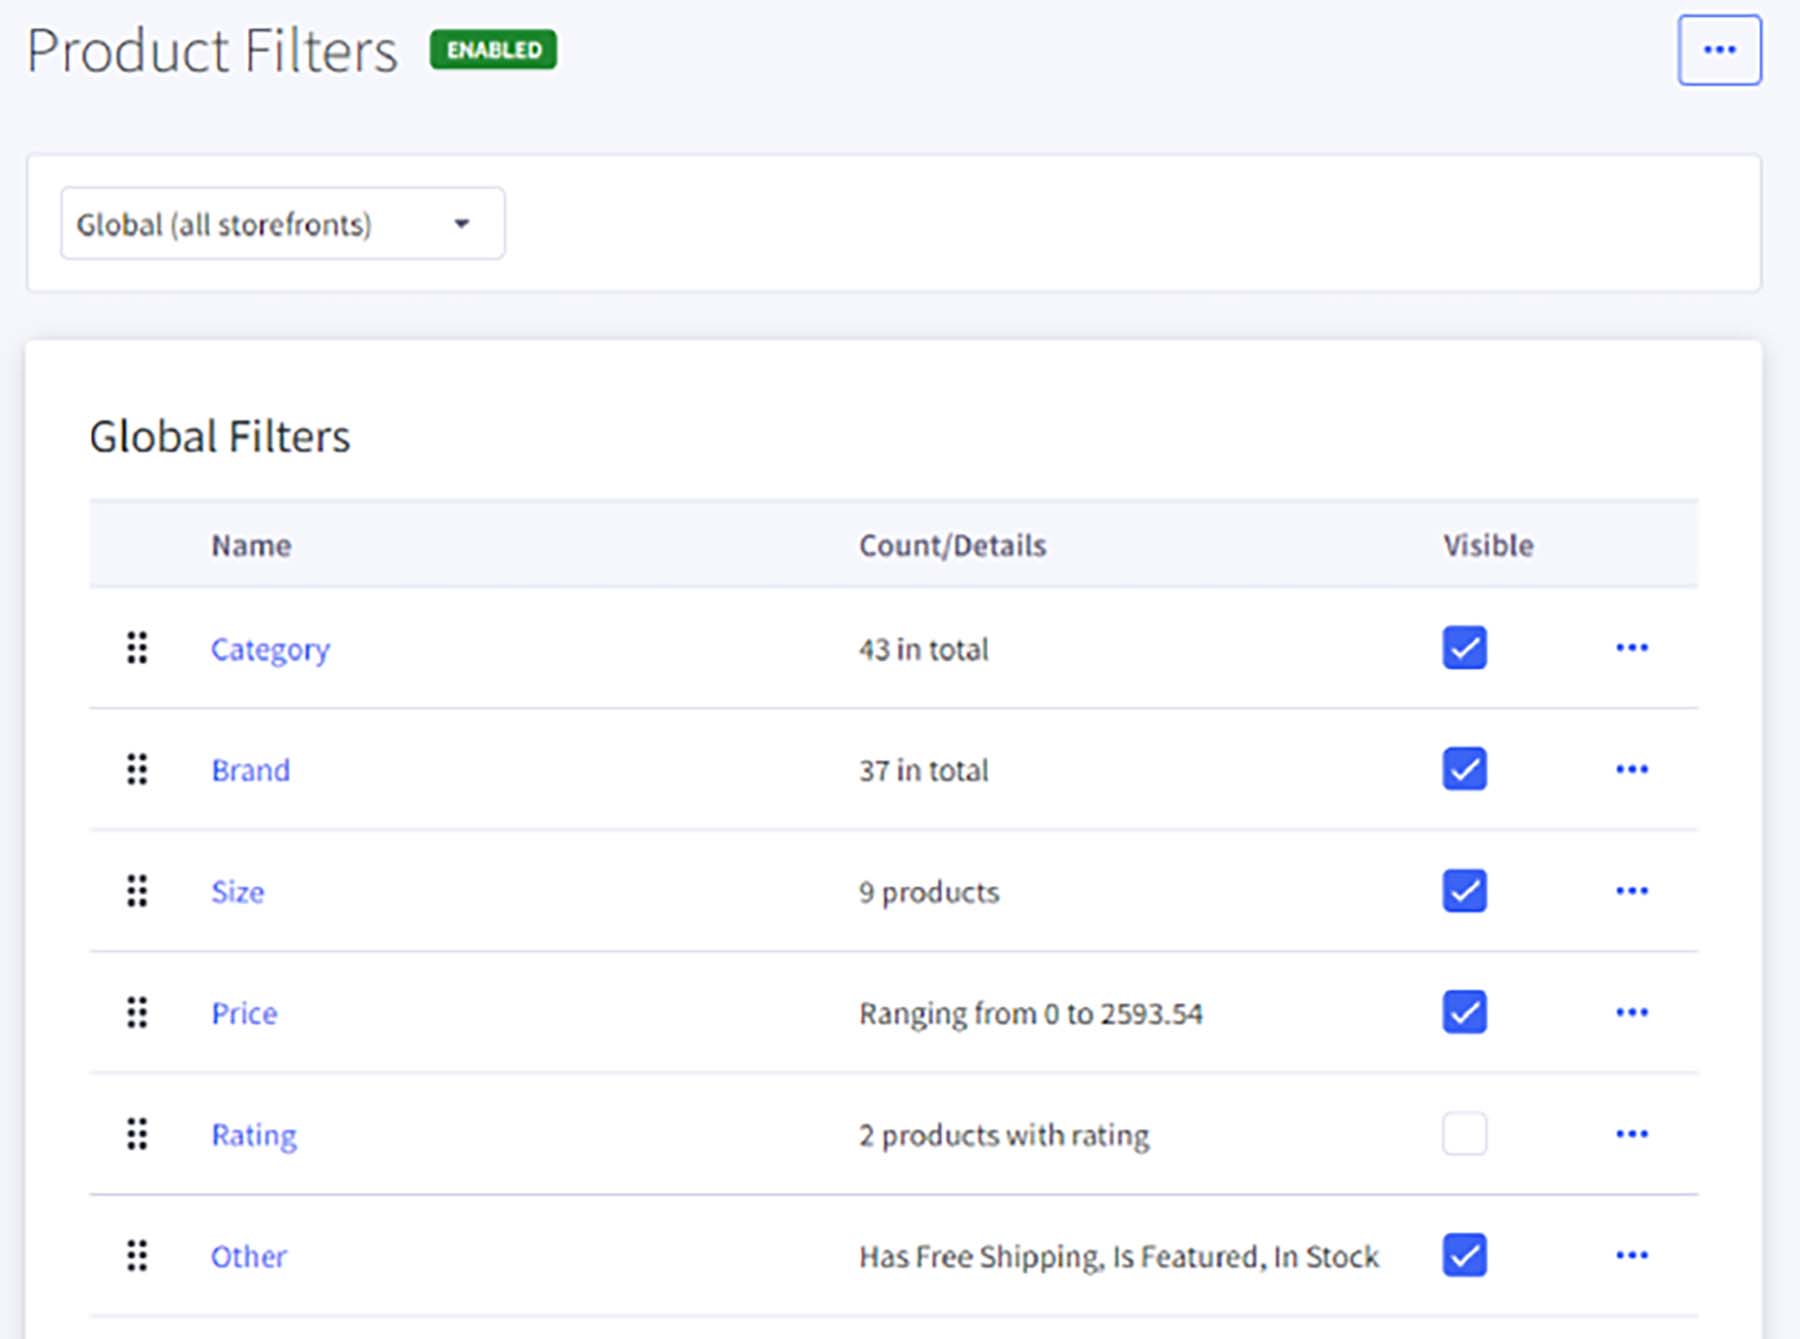 BigCommerce's product filters feature